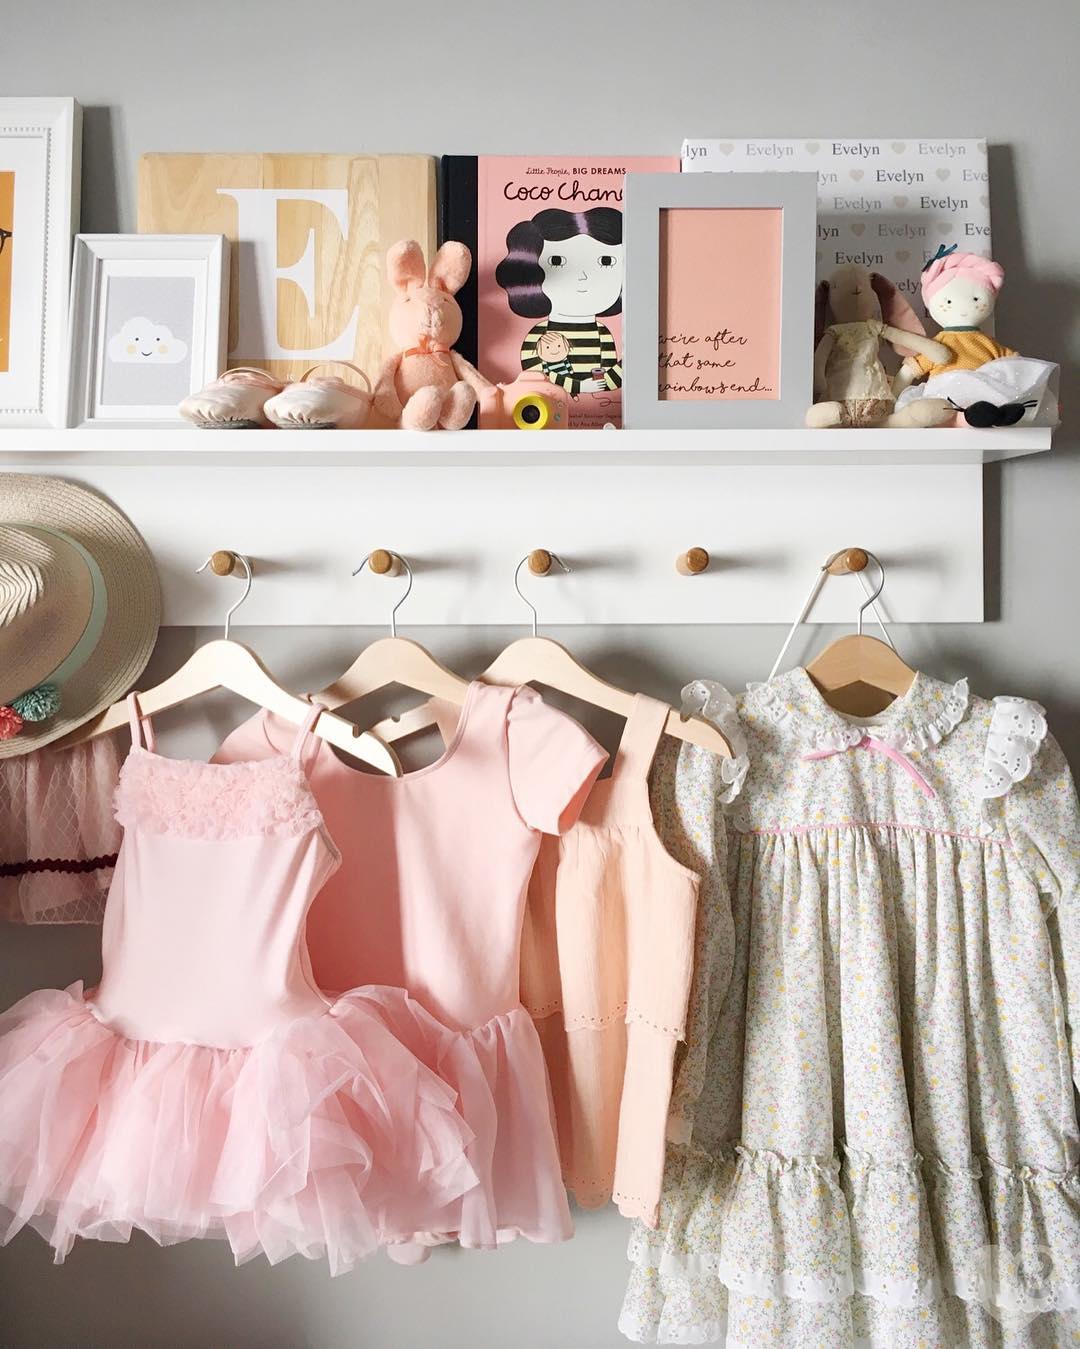 shelf with clothing hooks and clothes hanging photo by Instagram user @evelynloveshome